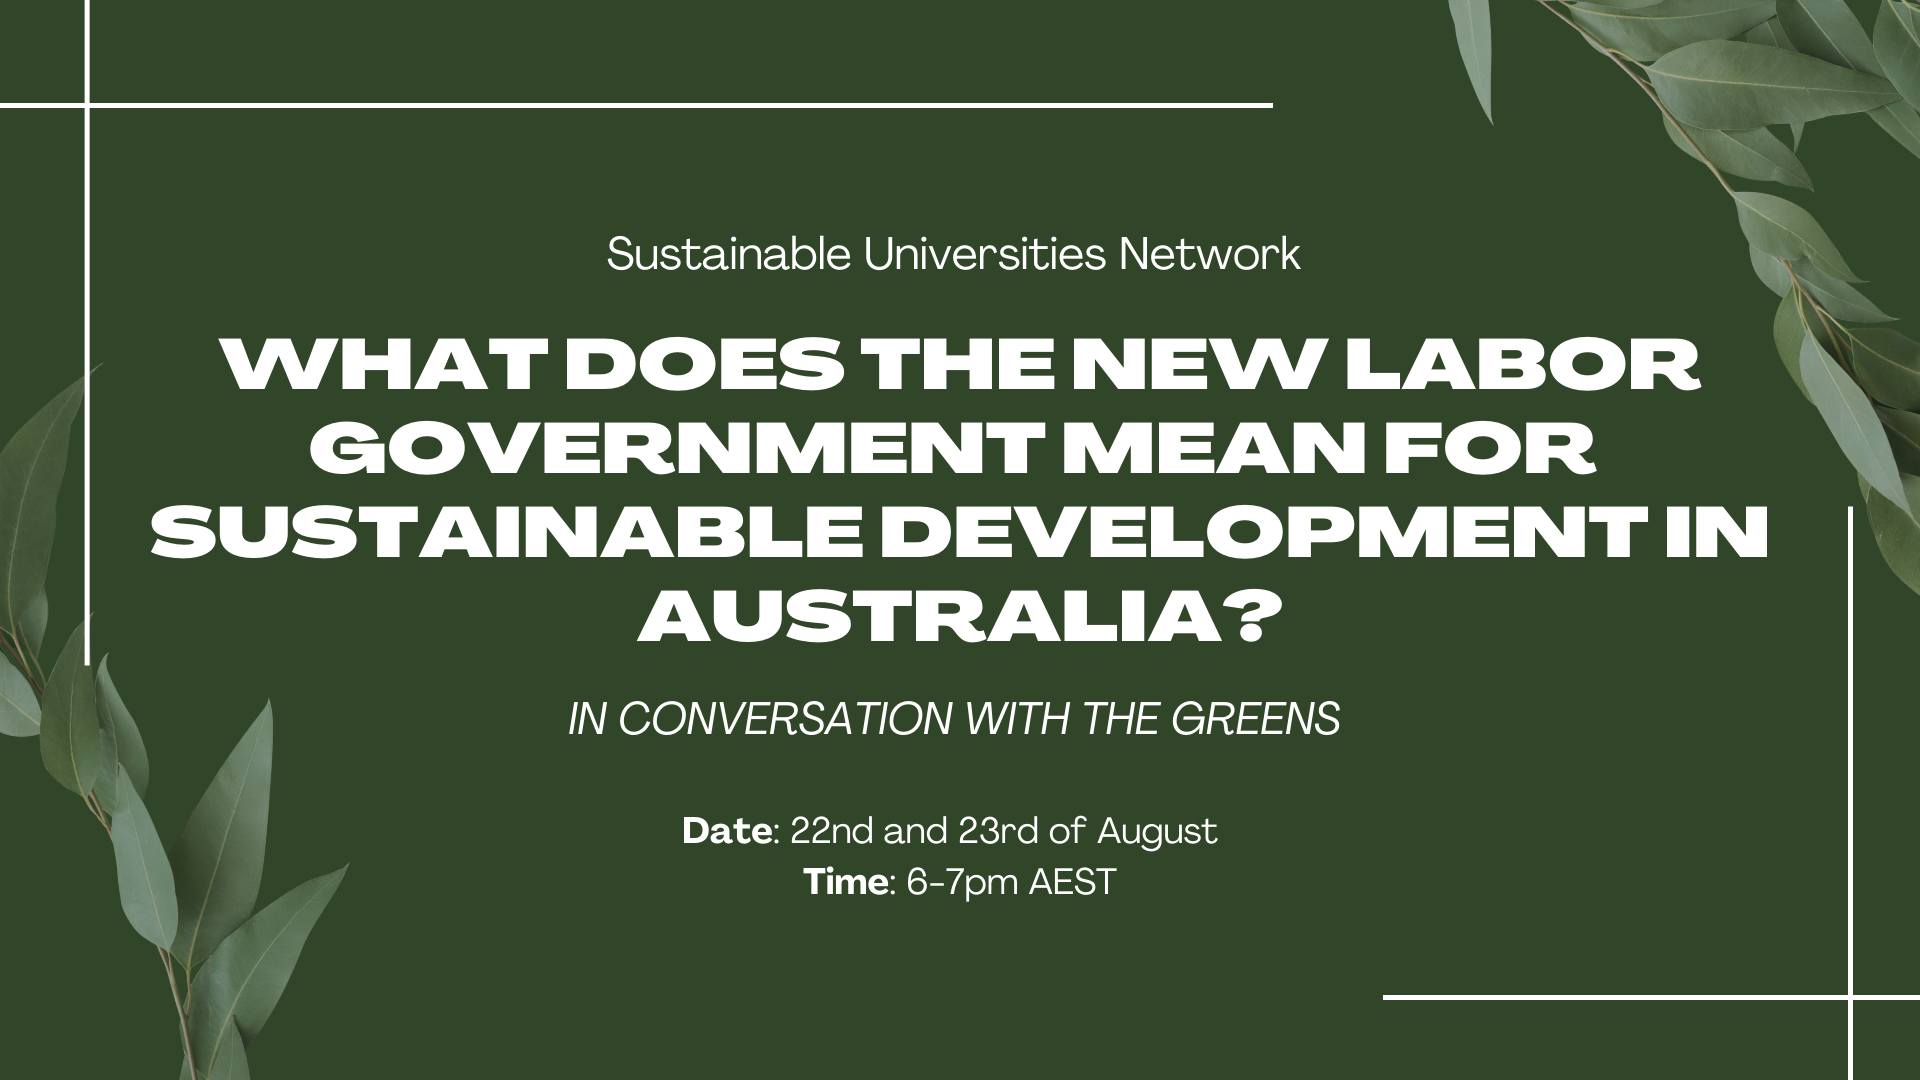  Sustainable Universities Network. What does the new Labor Government mean for sustainable development in Australia? In conversation with the Greens. Date: 22nd and 23rd of August, 2022. Time: 6-7pm AEST.